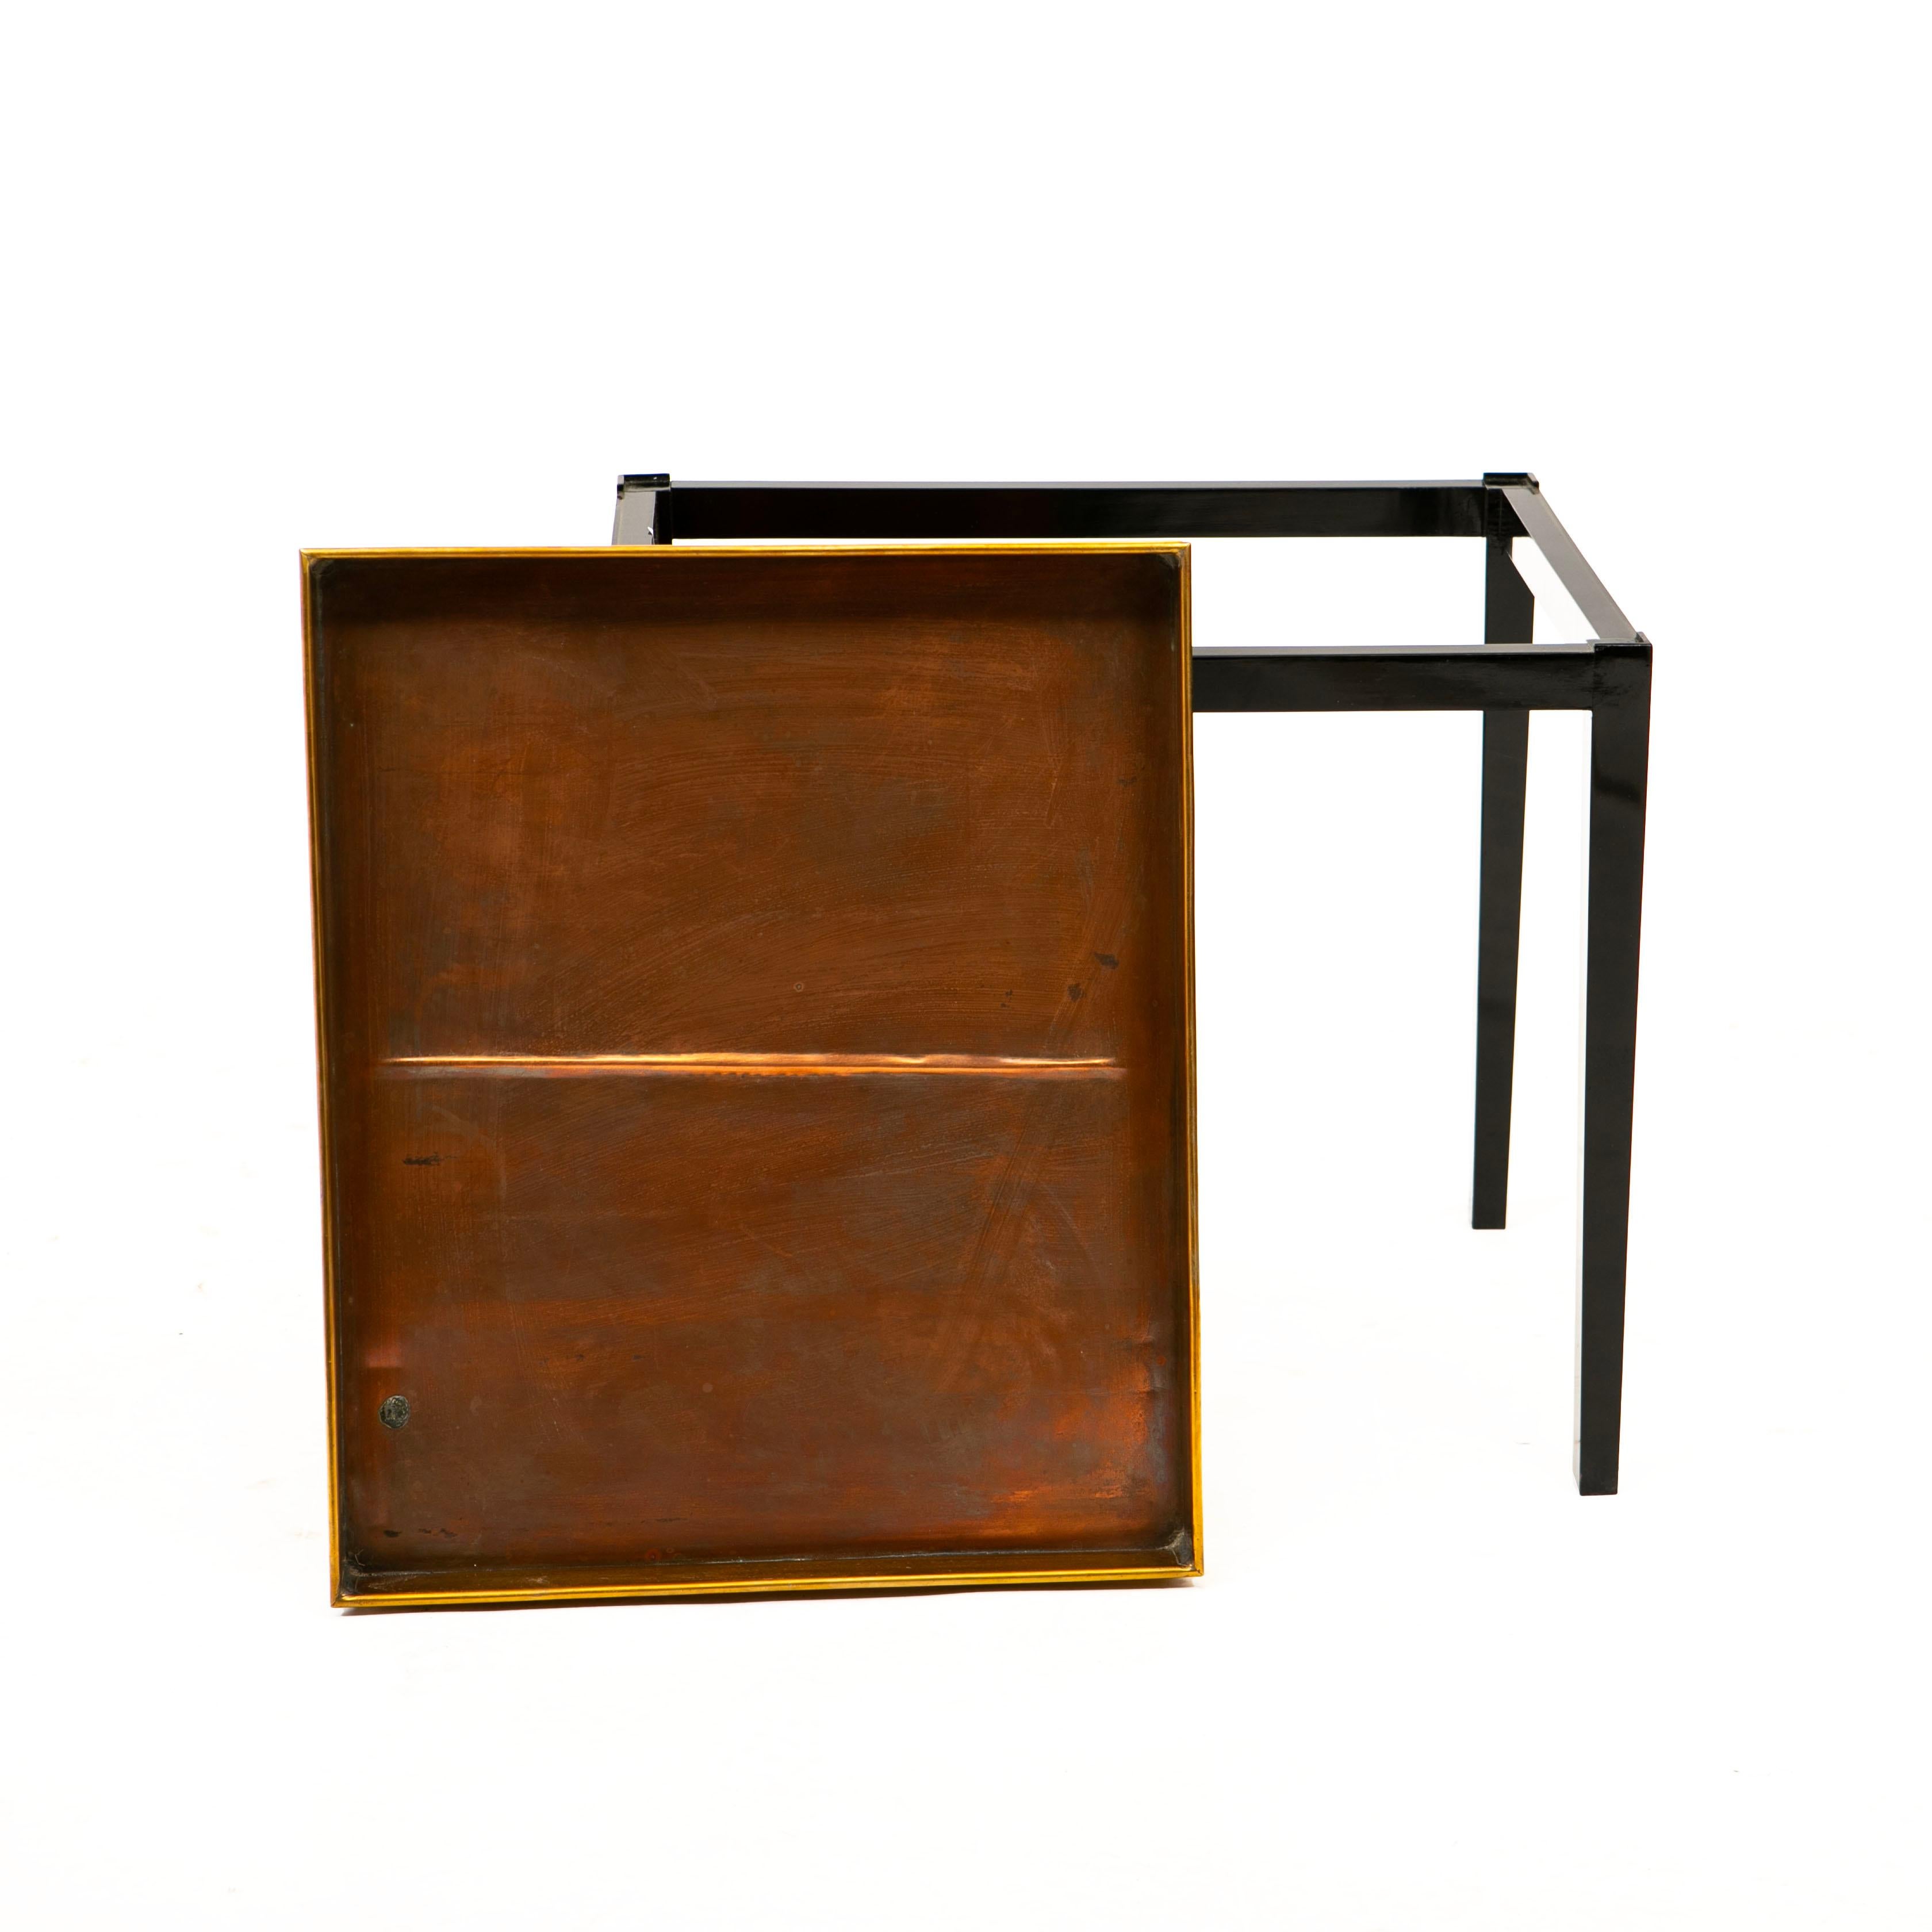 20th Century Tray Table Brass / Copper Black Polished Base